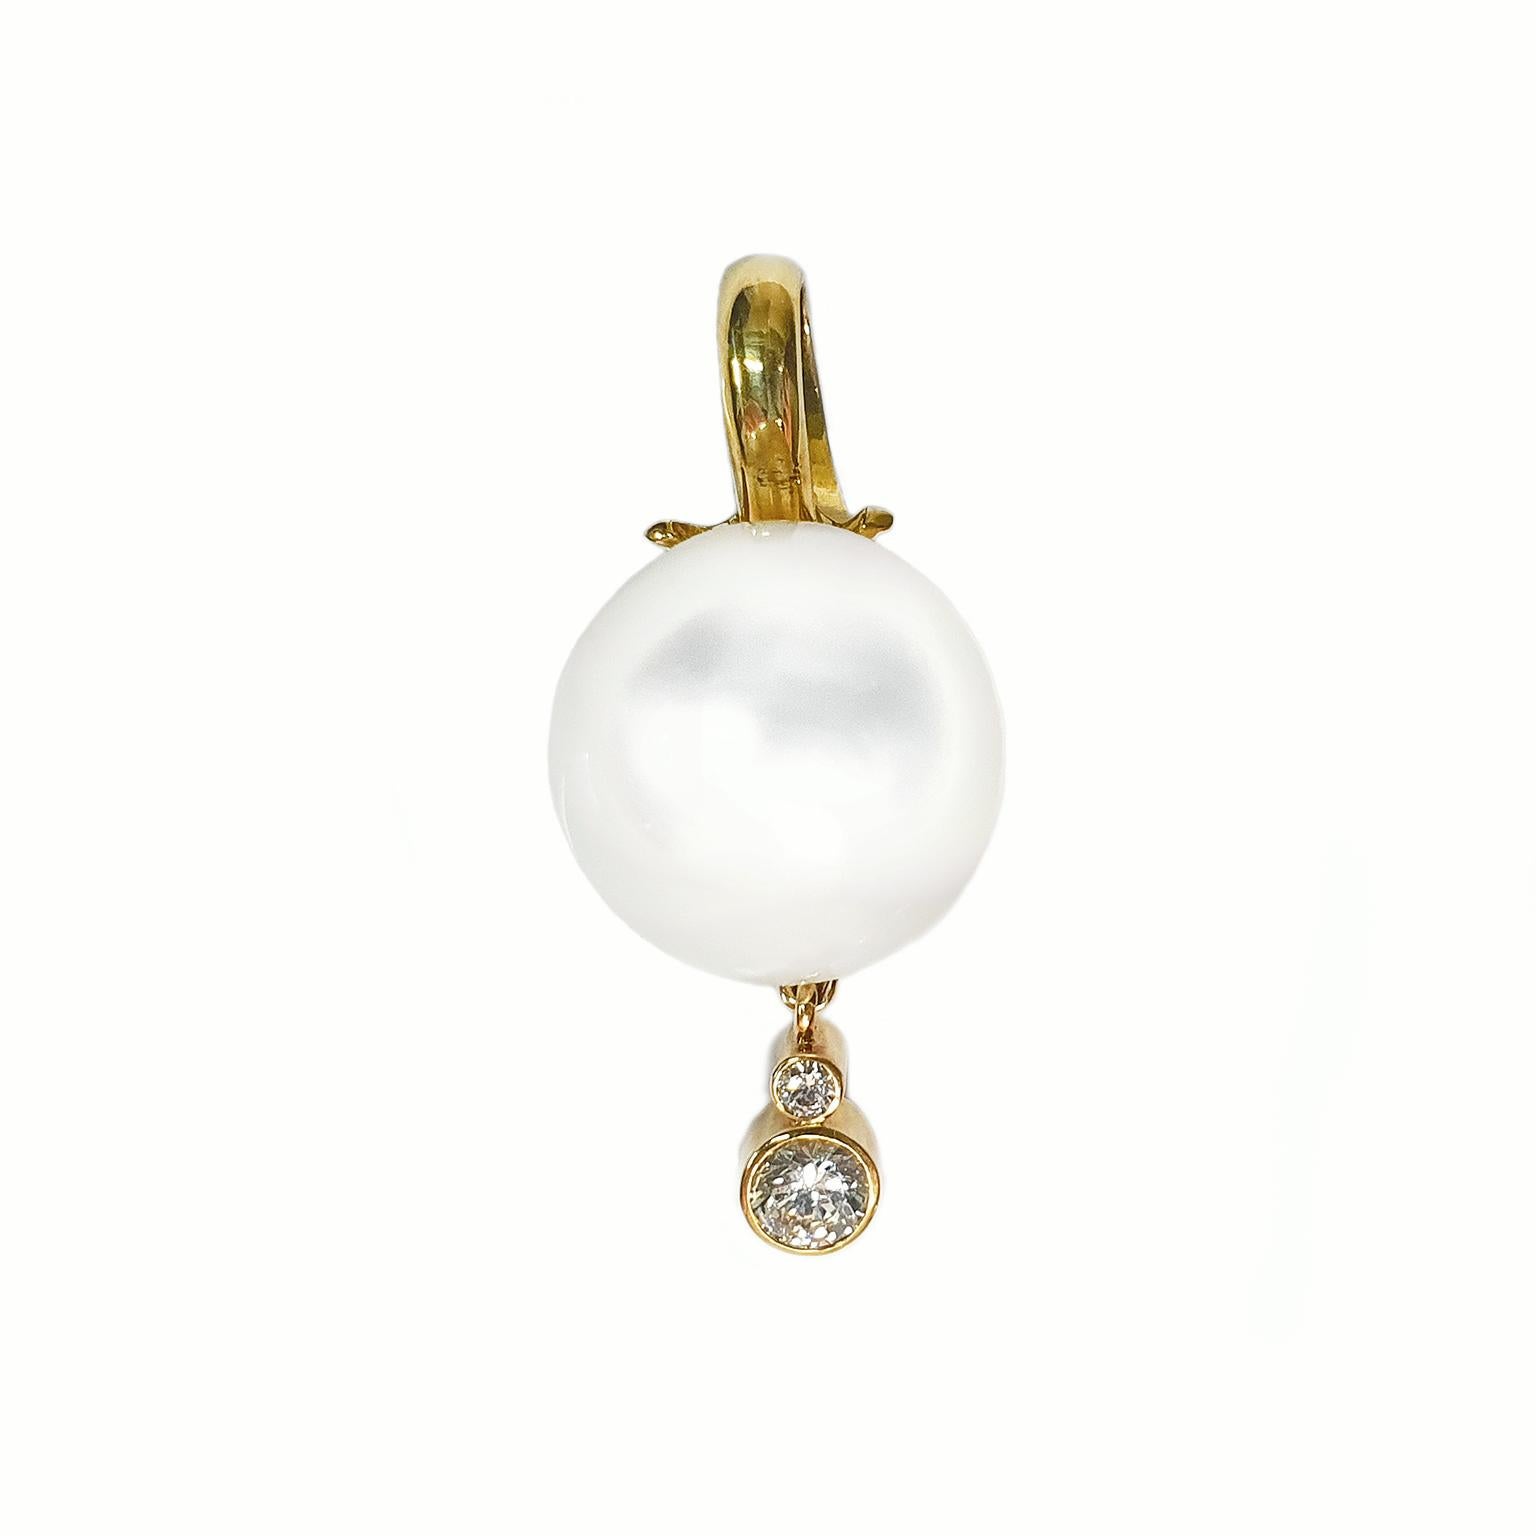 Paul Amey’s pearl and diamond pendant was crafted from 18K yellow gold featuring a 13.8mm South Sea pearl with a 25pt and a 5pt round white diamonds dropping from the base of the pearl. The pearl pendant is completed with a neoprene choker with 9K